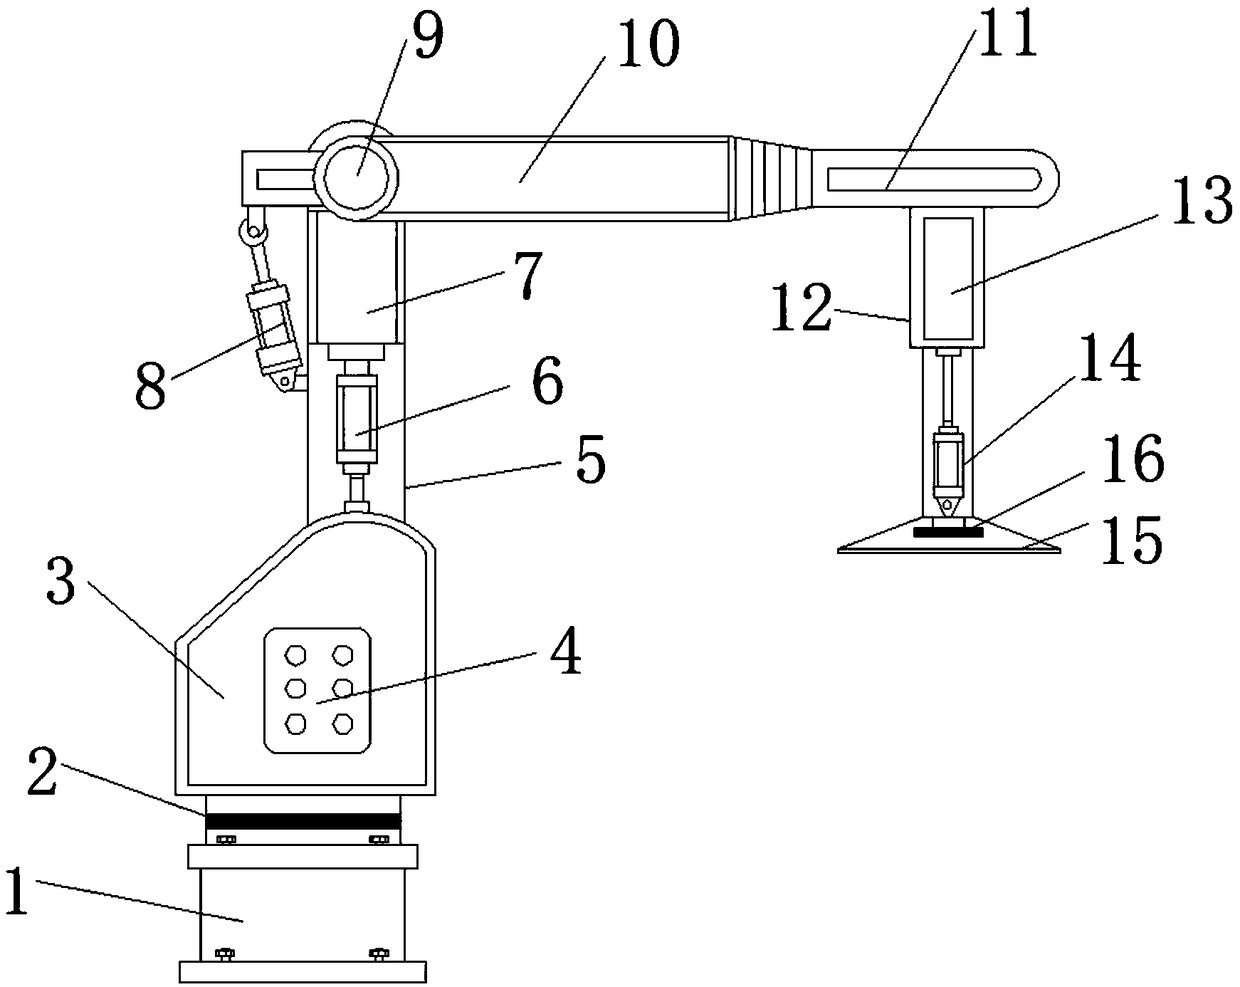 Displacement mechanical arm for glass processing